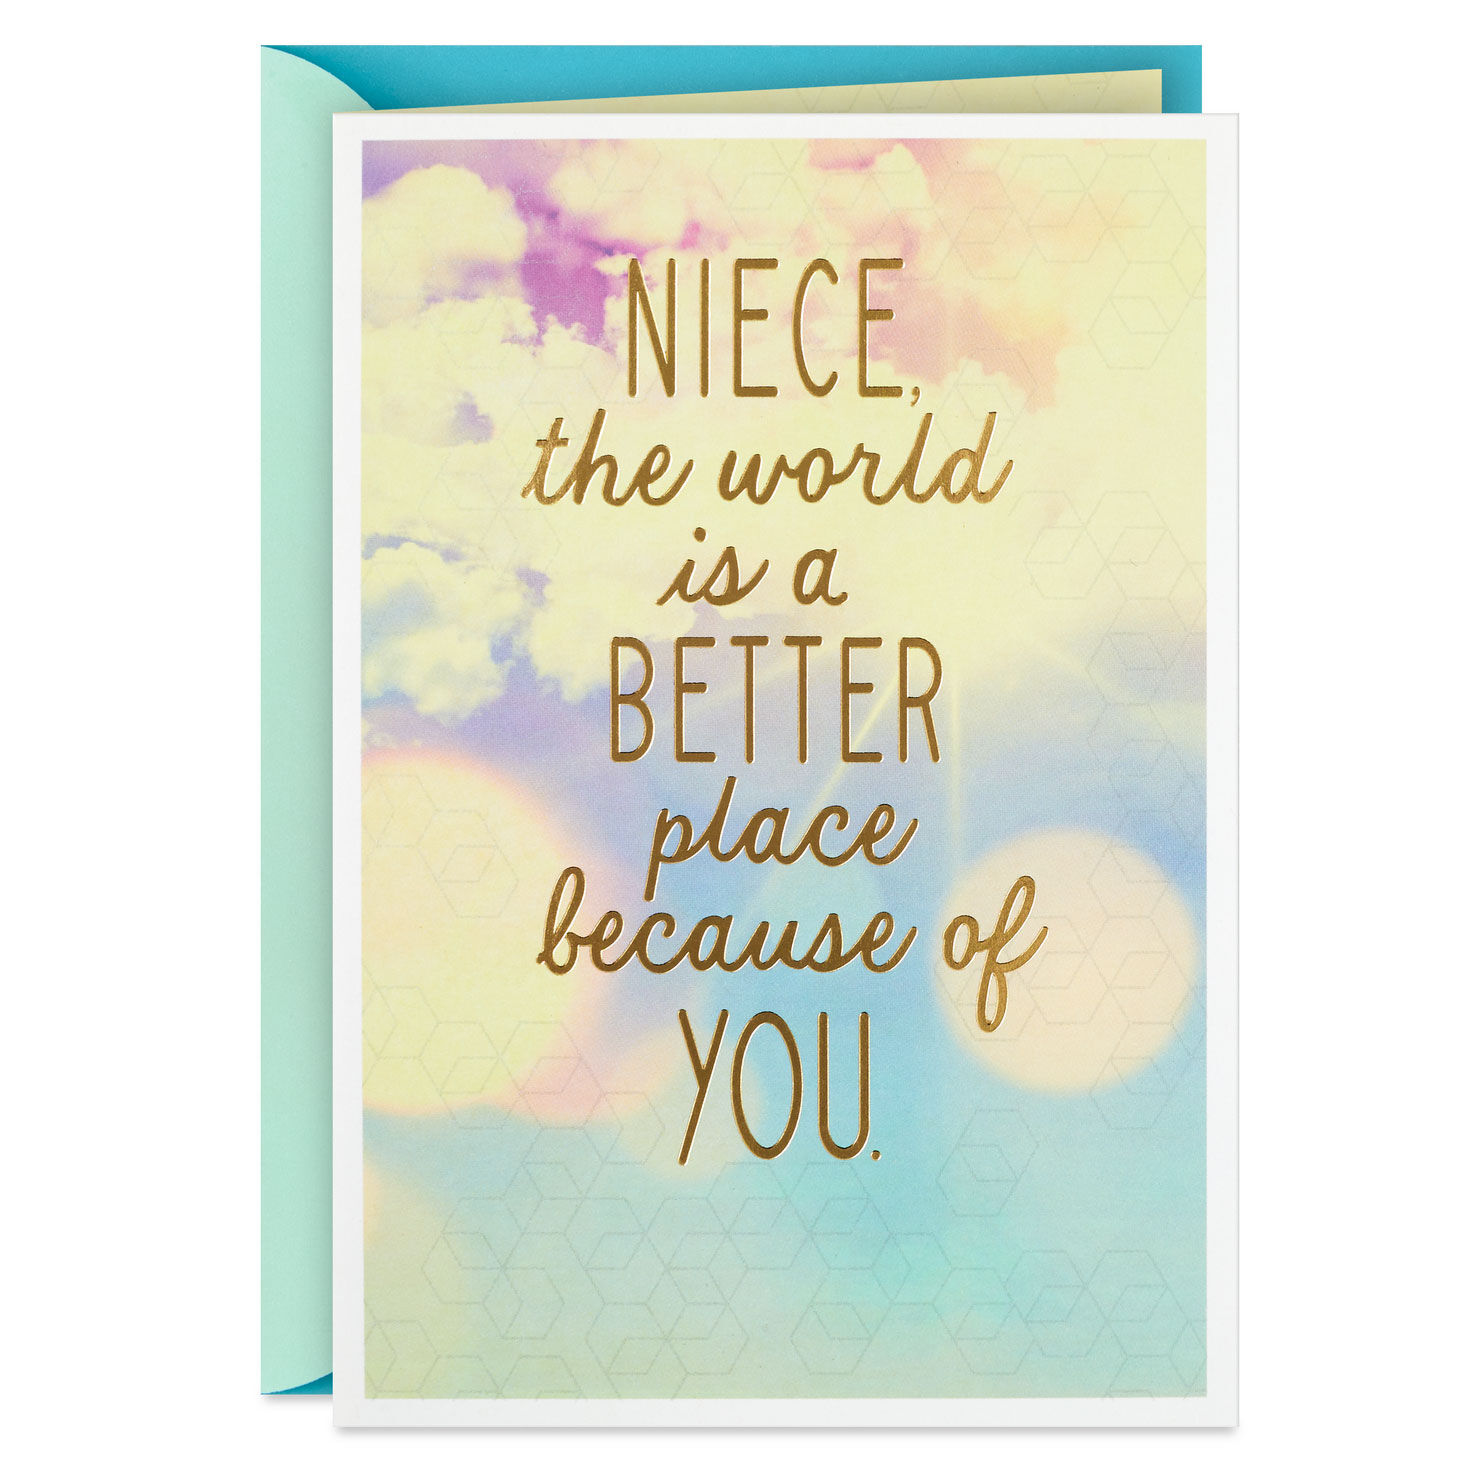 You Make the World a Better Place Mother's Day Card for Niece for only USD 2.99 | Hallmark